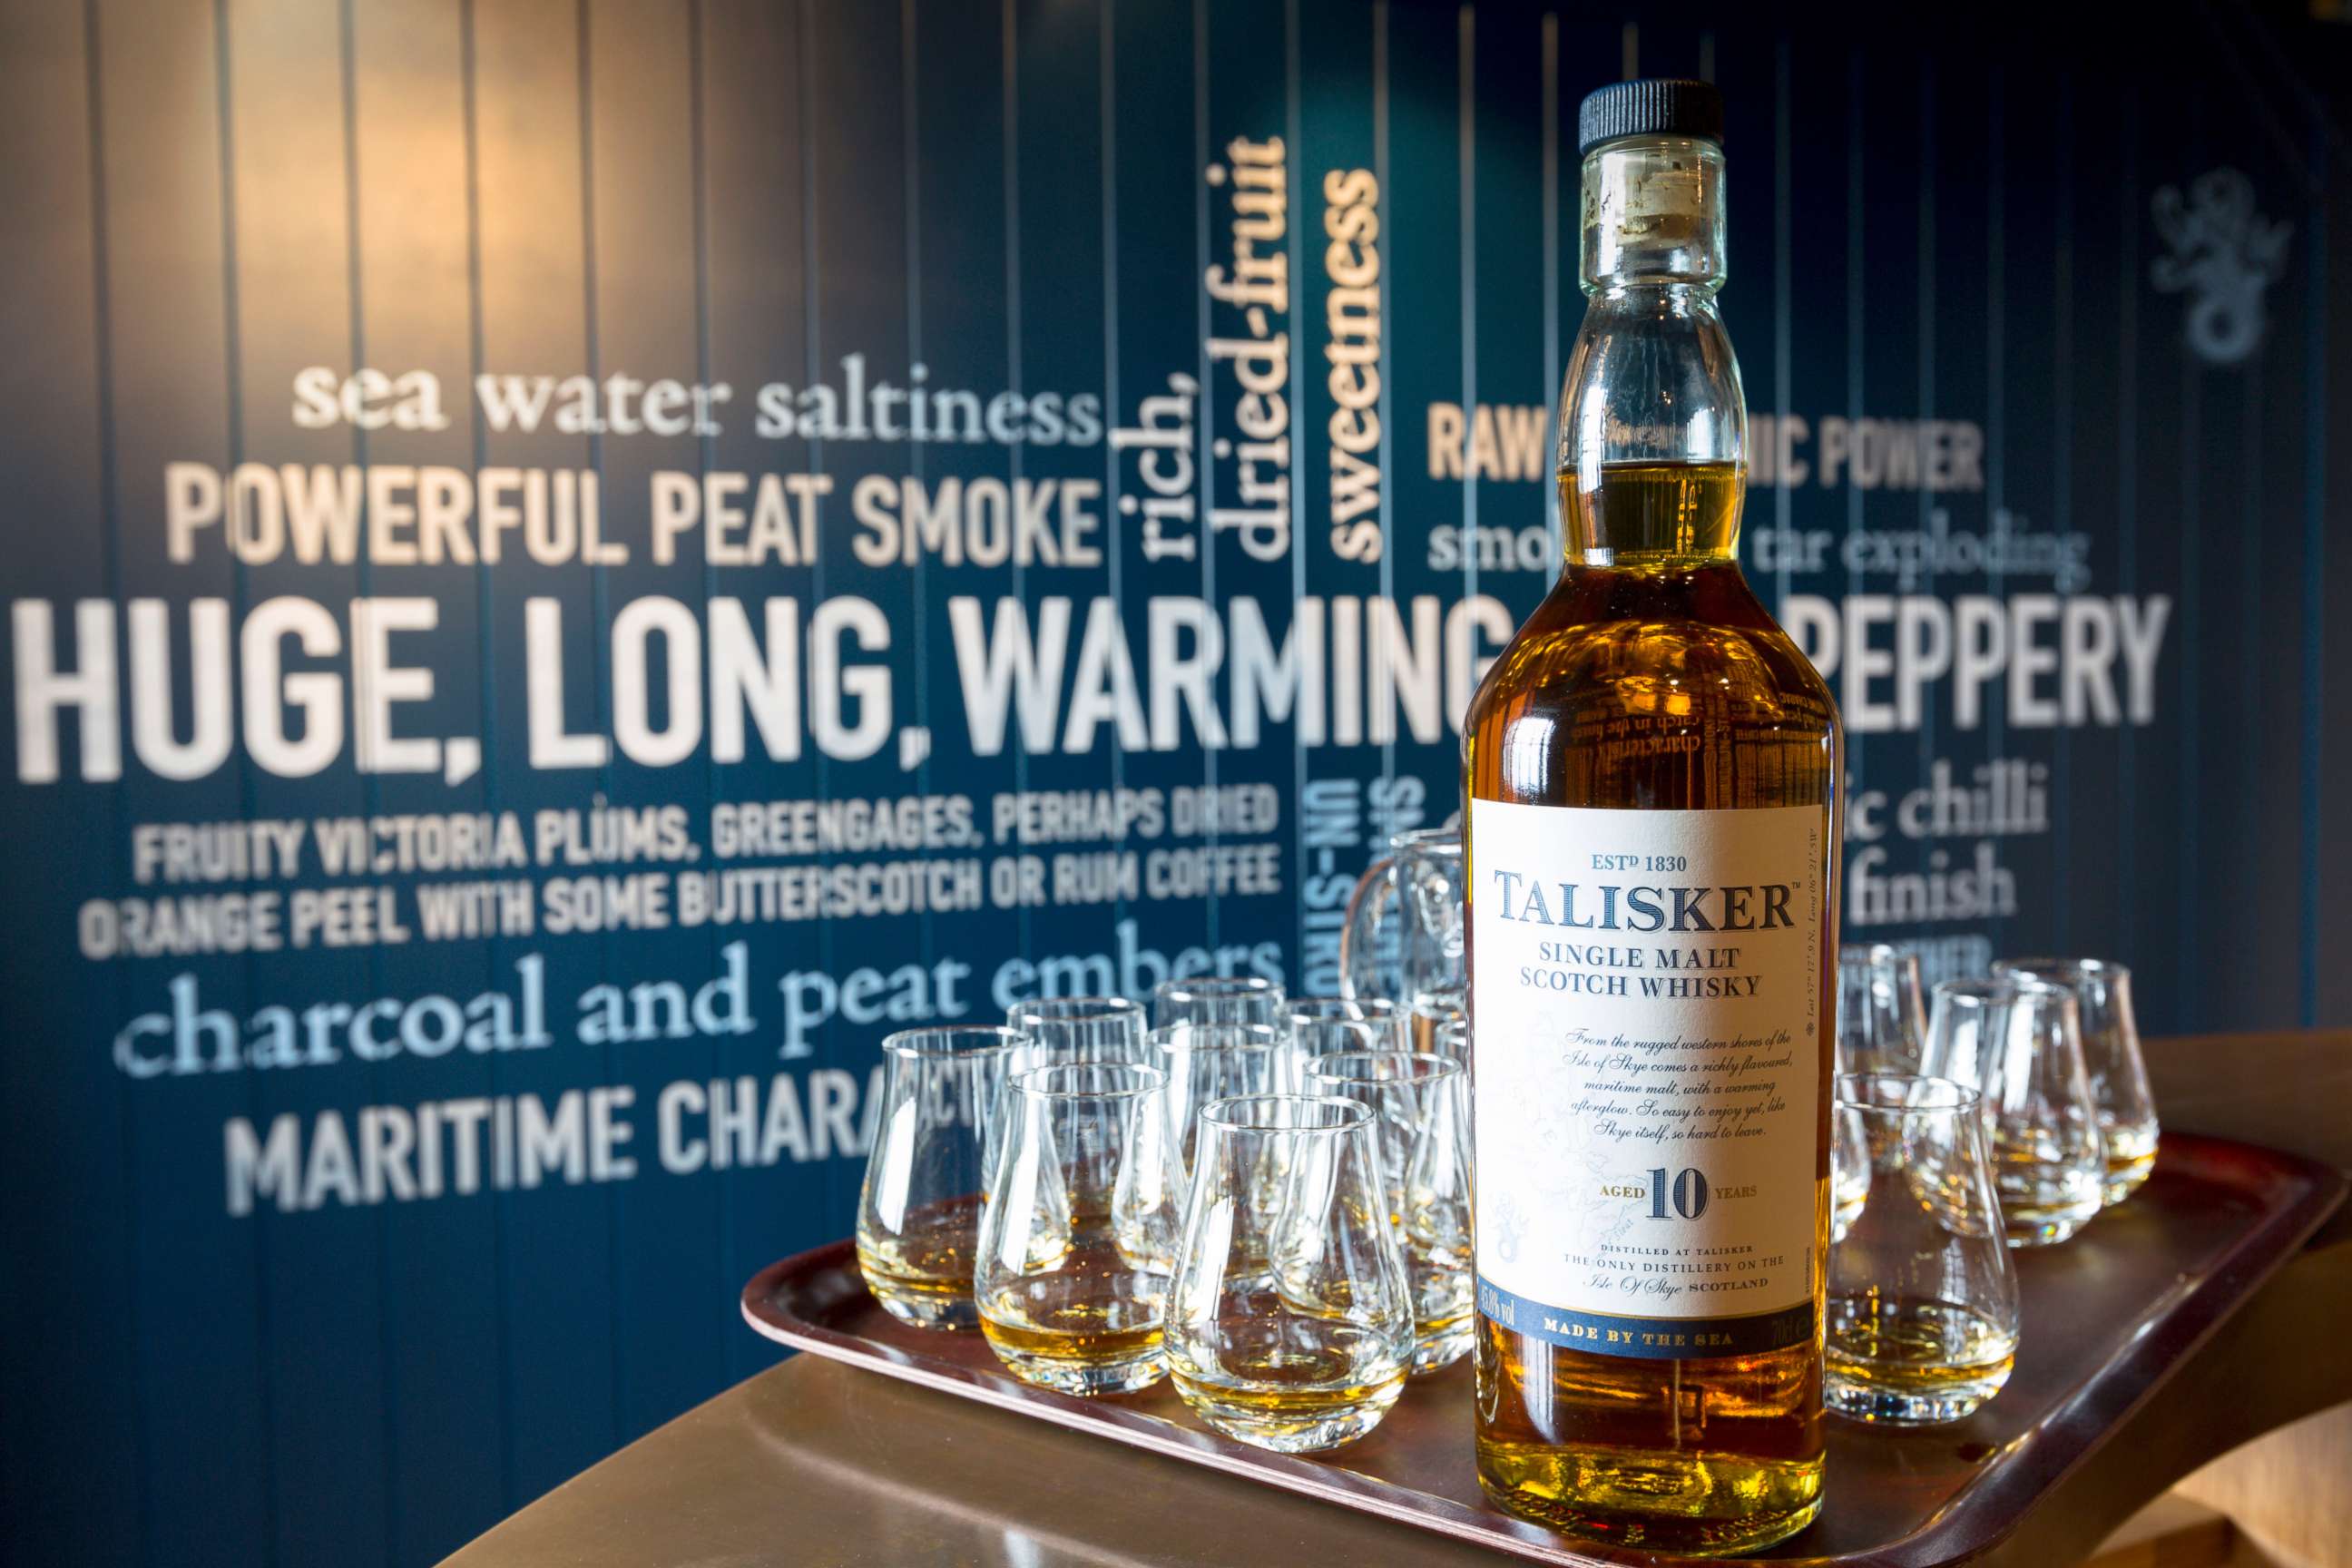 PHOTO: 75cl bottle of 10 year old Talisker single malt Scotch Whiskey and dram glasses for tasting (dramming) as part of the visitors tour at the Distillery in Carbost on Isle of Skye, Scotland, in this file photo dated June 2014.